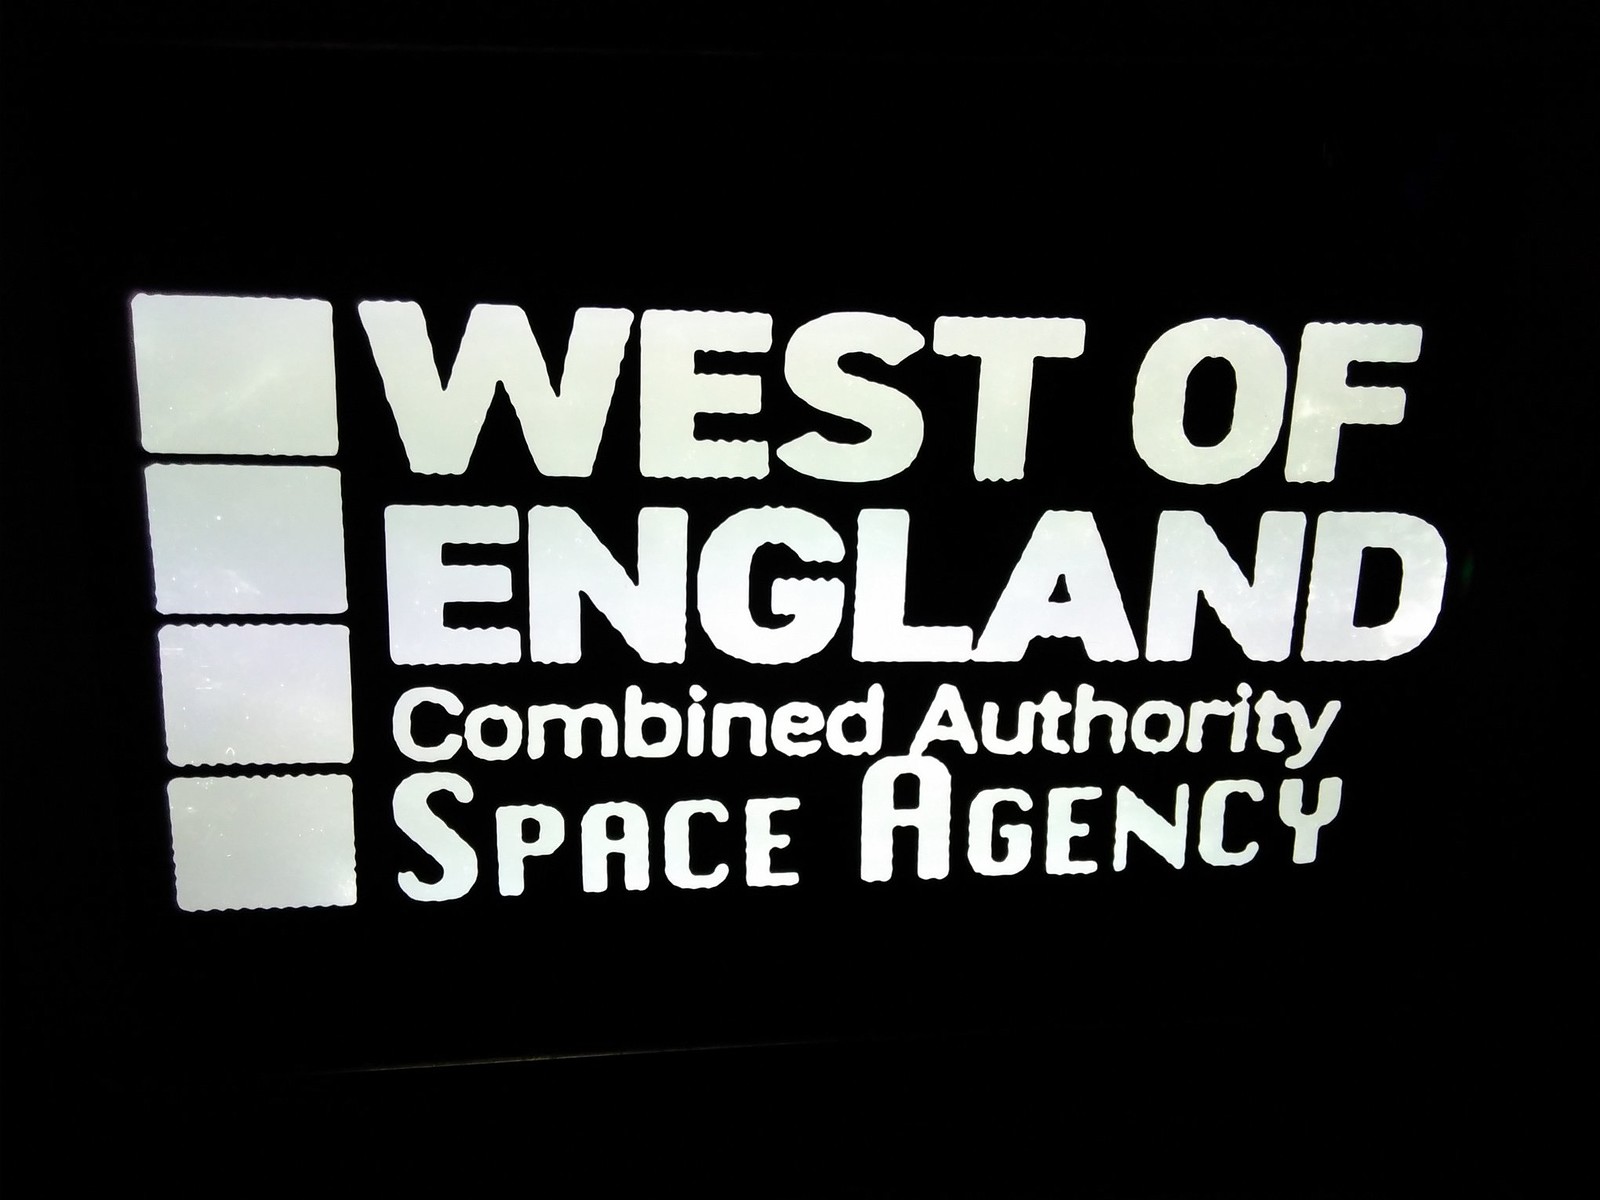 West of England Combined Authority Space Agency at The Basement